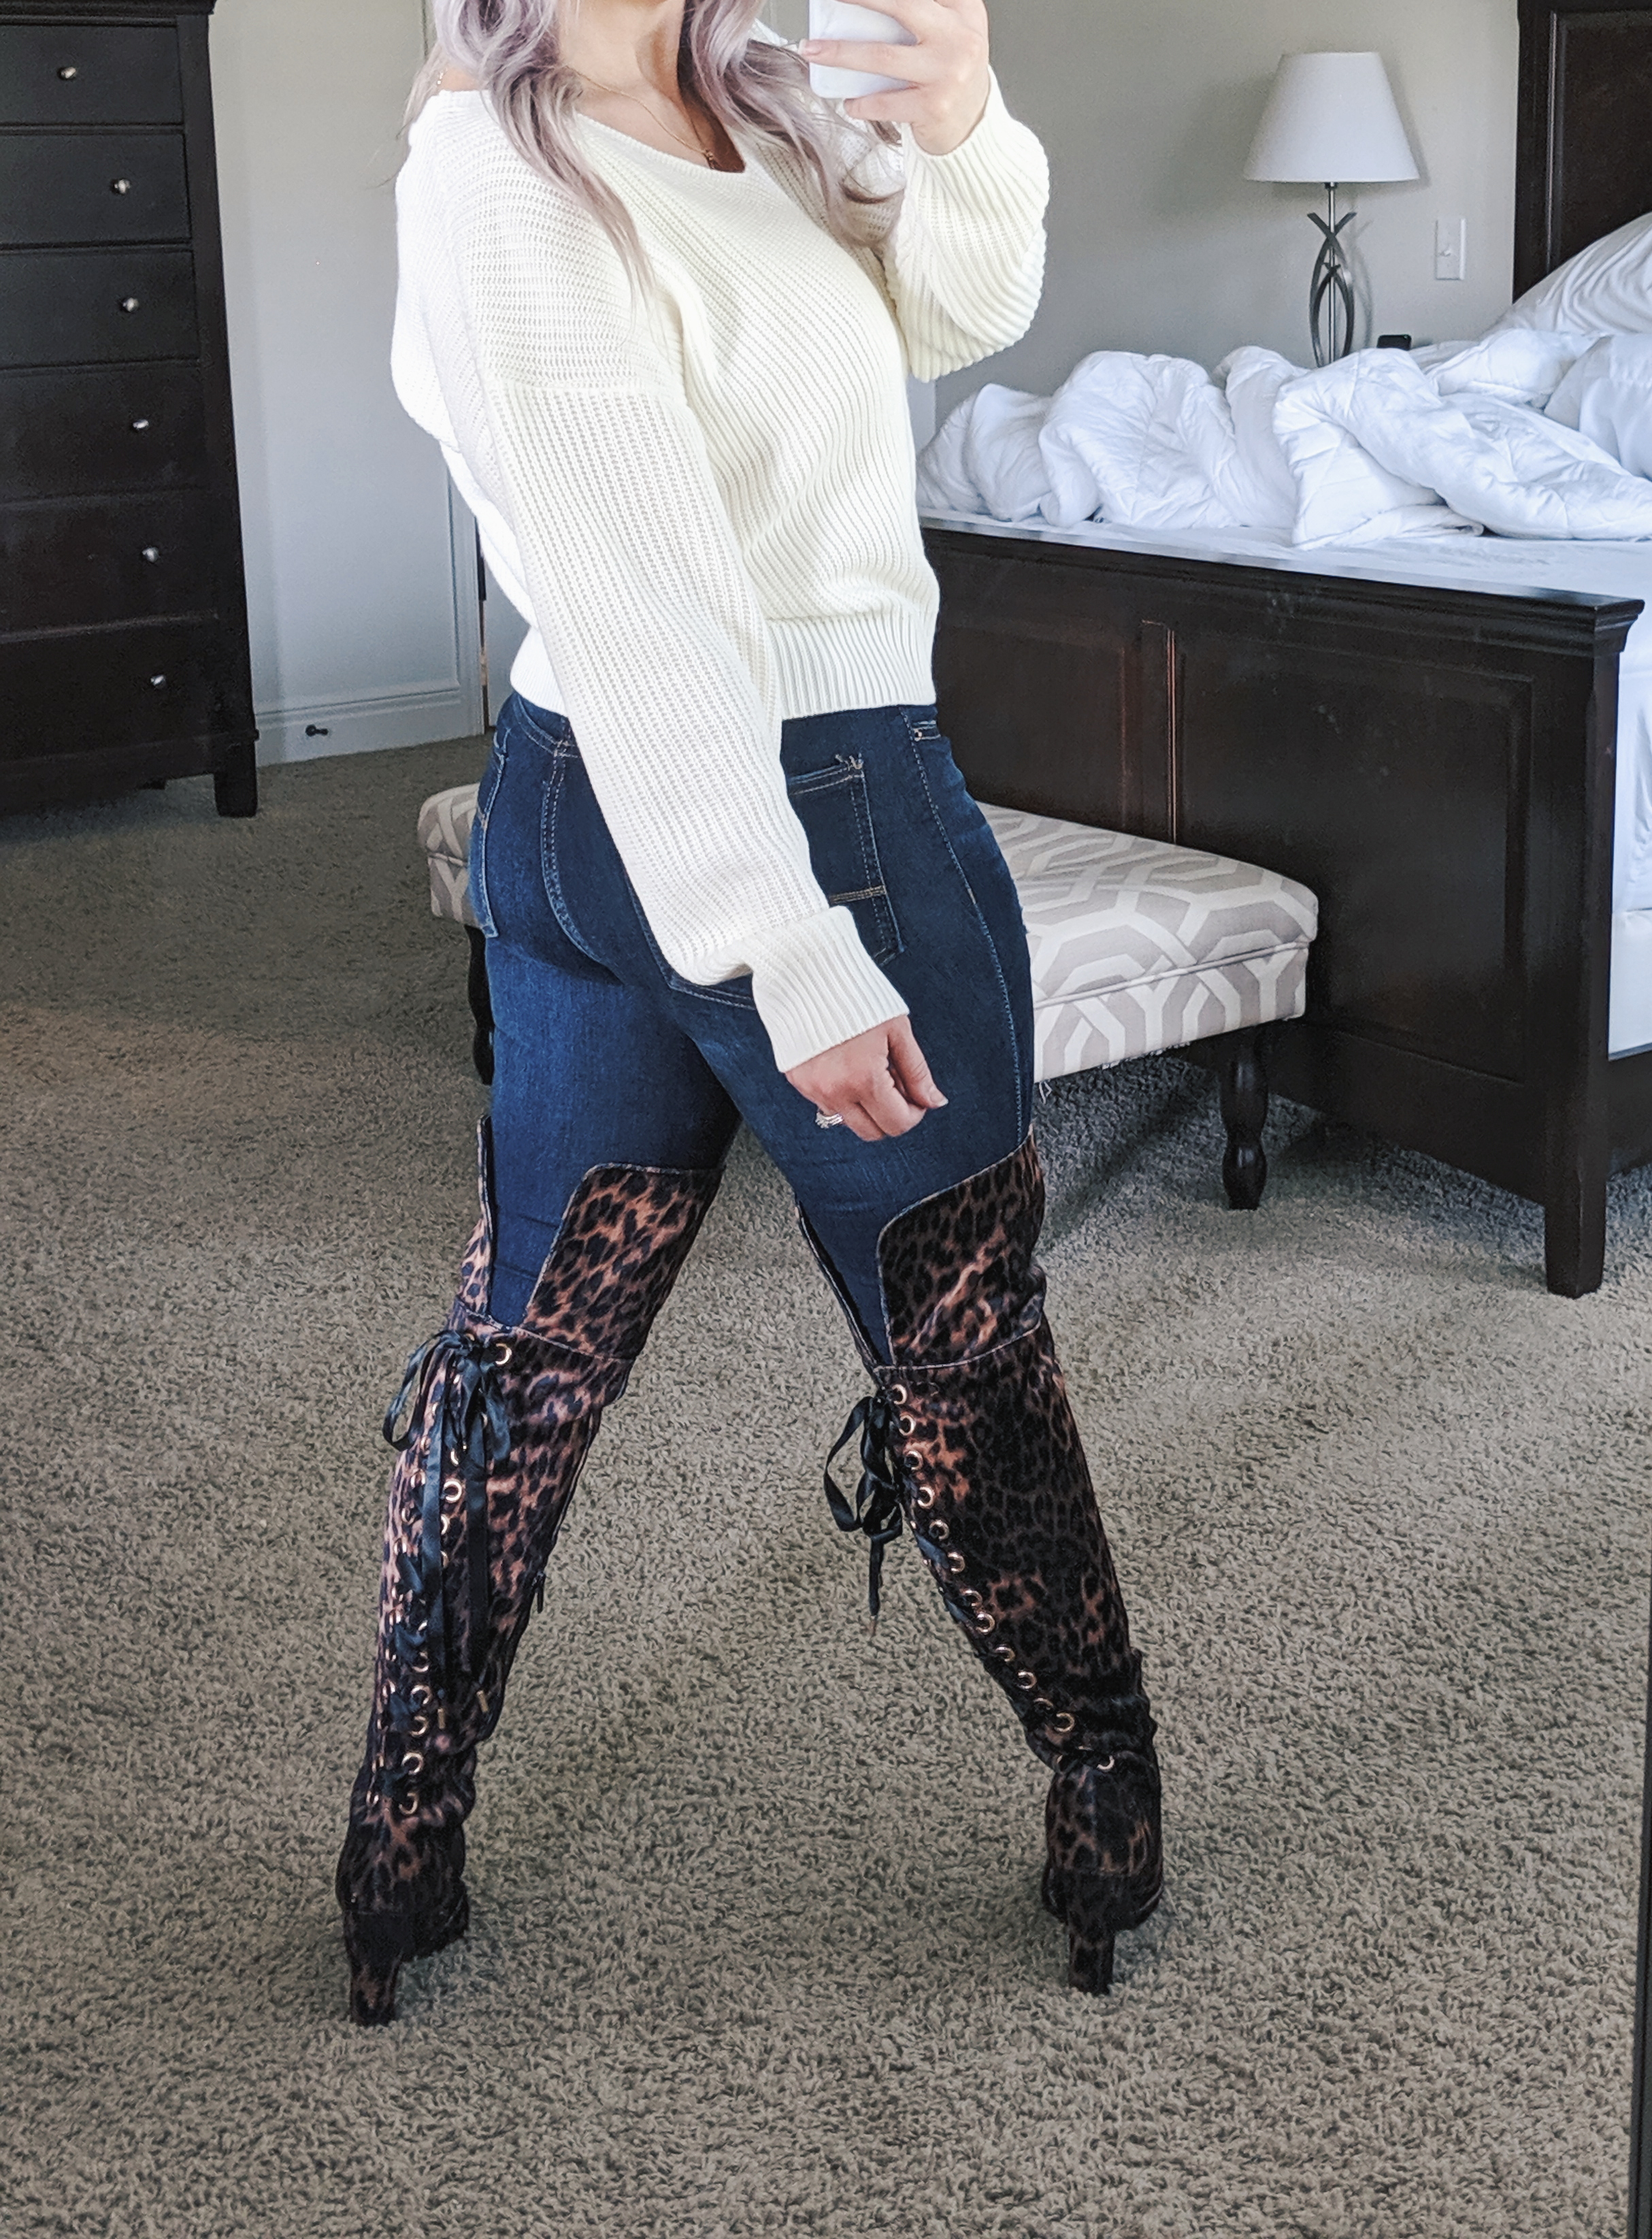 Shein Try On Haul 2019 - Is Shein legit? Shein try on haul featuring the cutest Shein finds for fall and winter 2019, styled by fashion blogger Tricia Nibarger of COVET by tricia. #shein #tryon #haul 